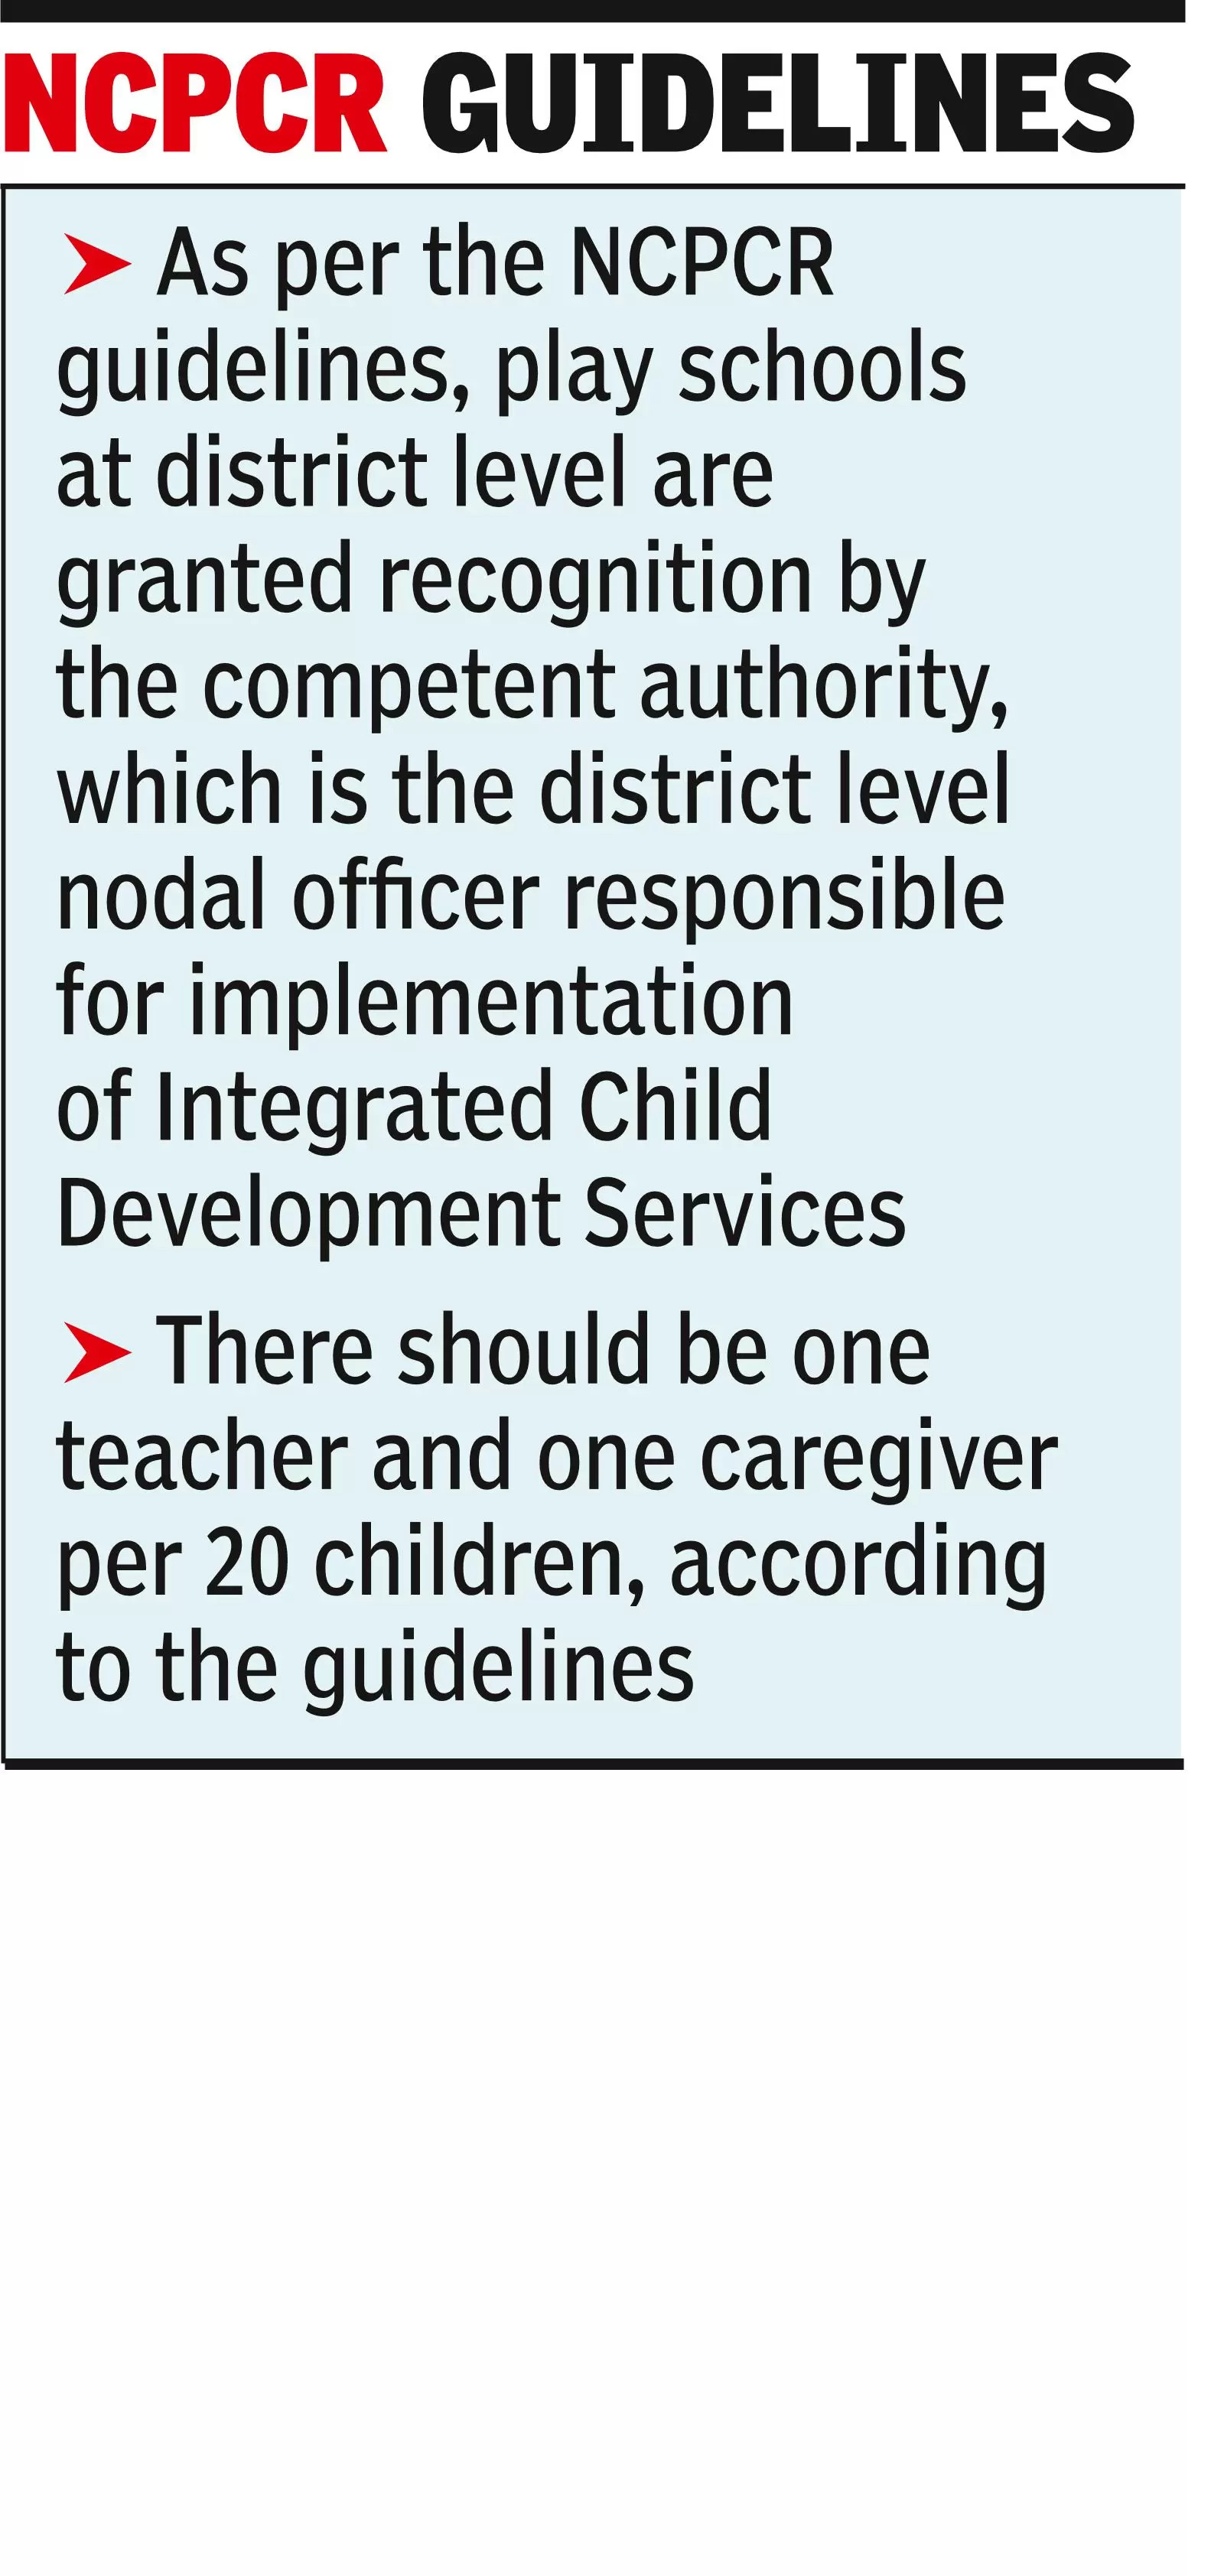 Only 2 of 489 Gurgaon play schools, 7 of Pkl’s 116 recognised: RTI info